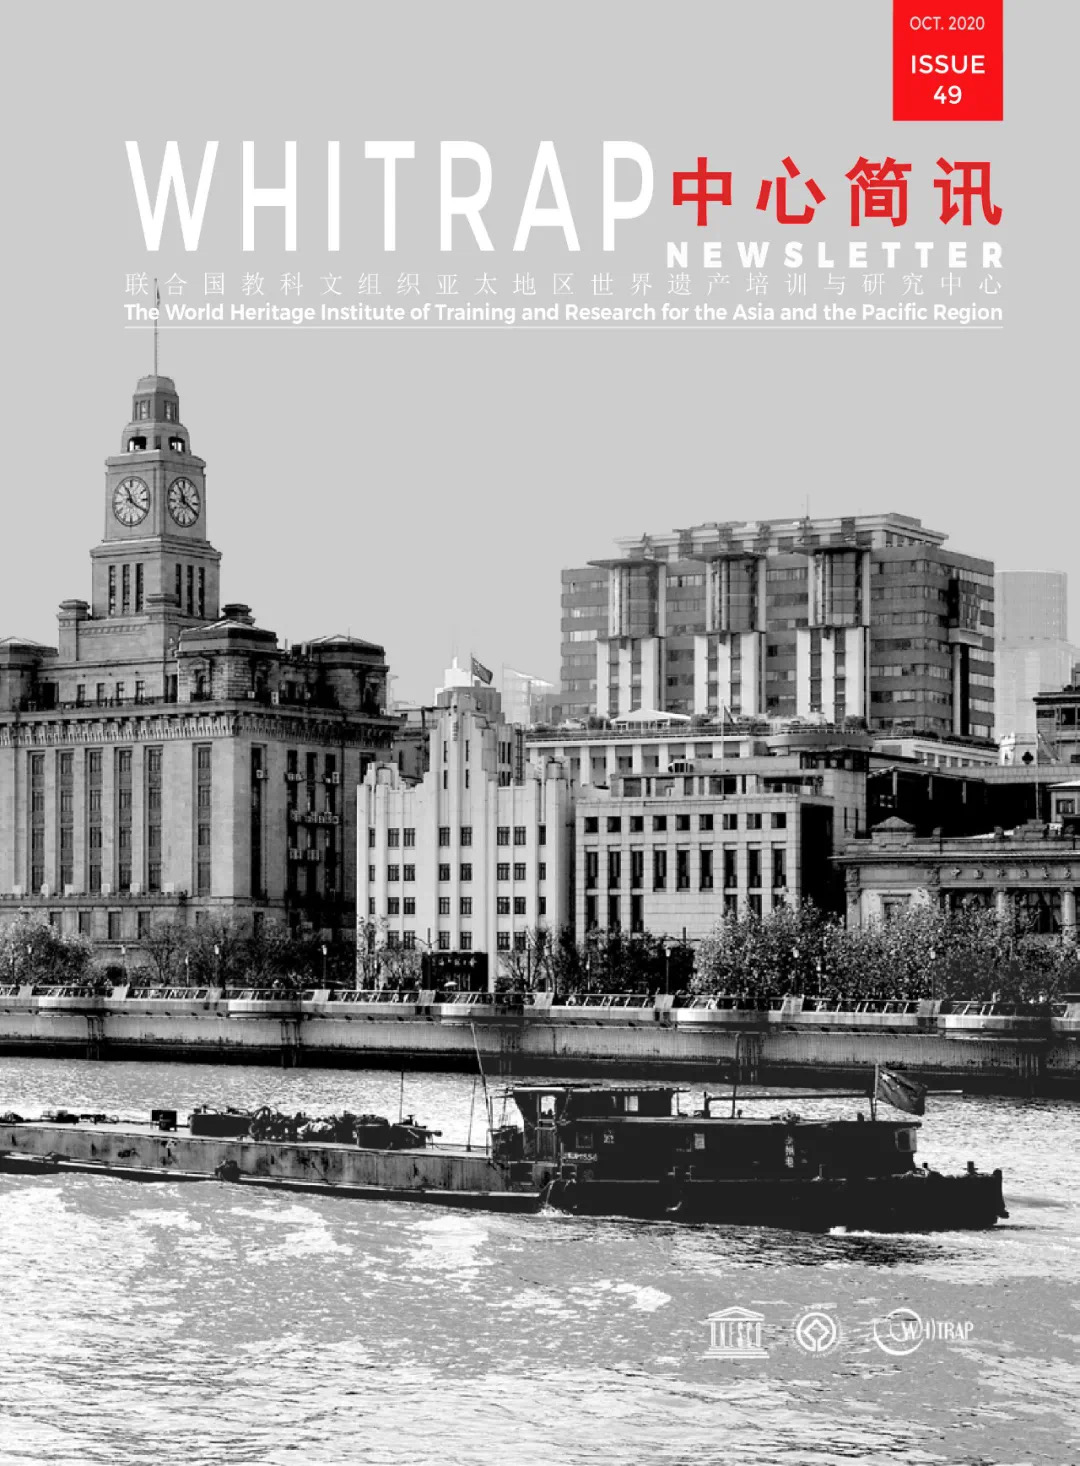 WHITRAP Newsletter (Issue 49)